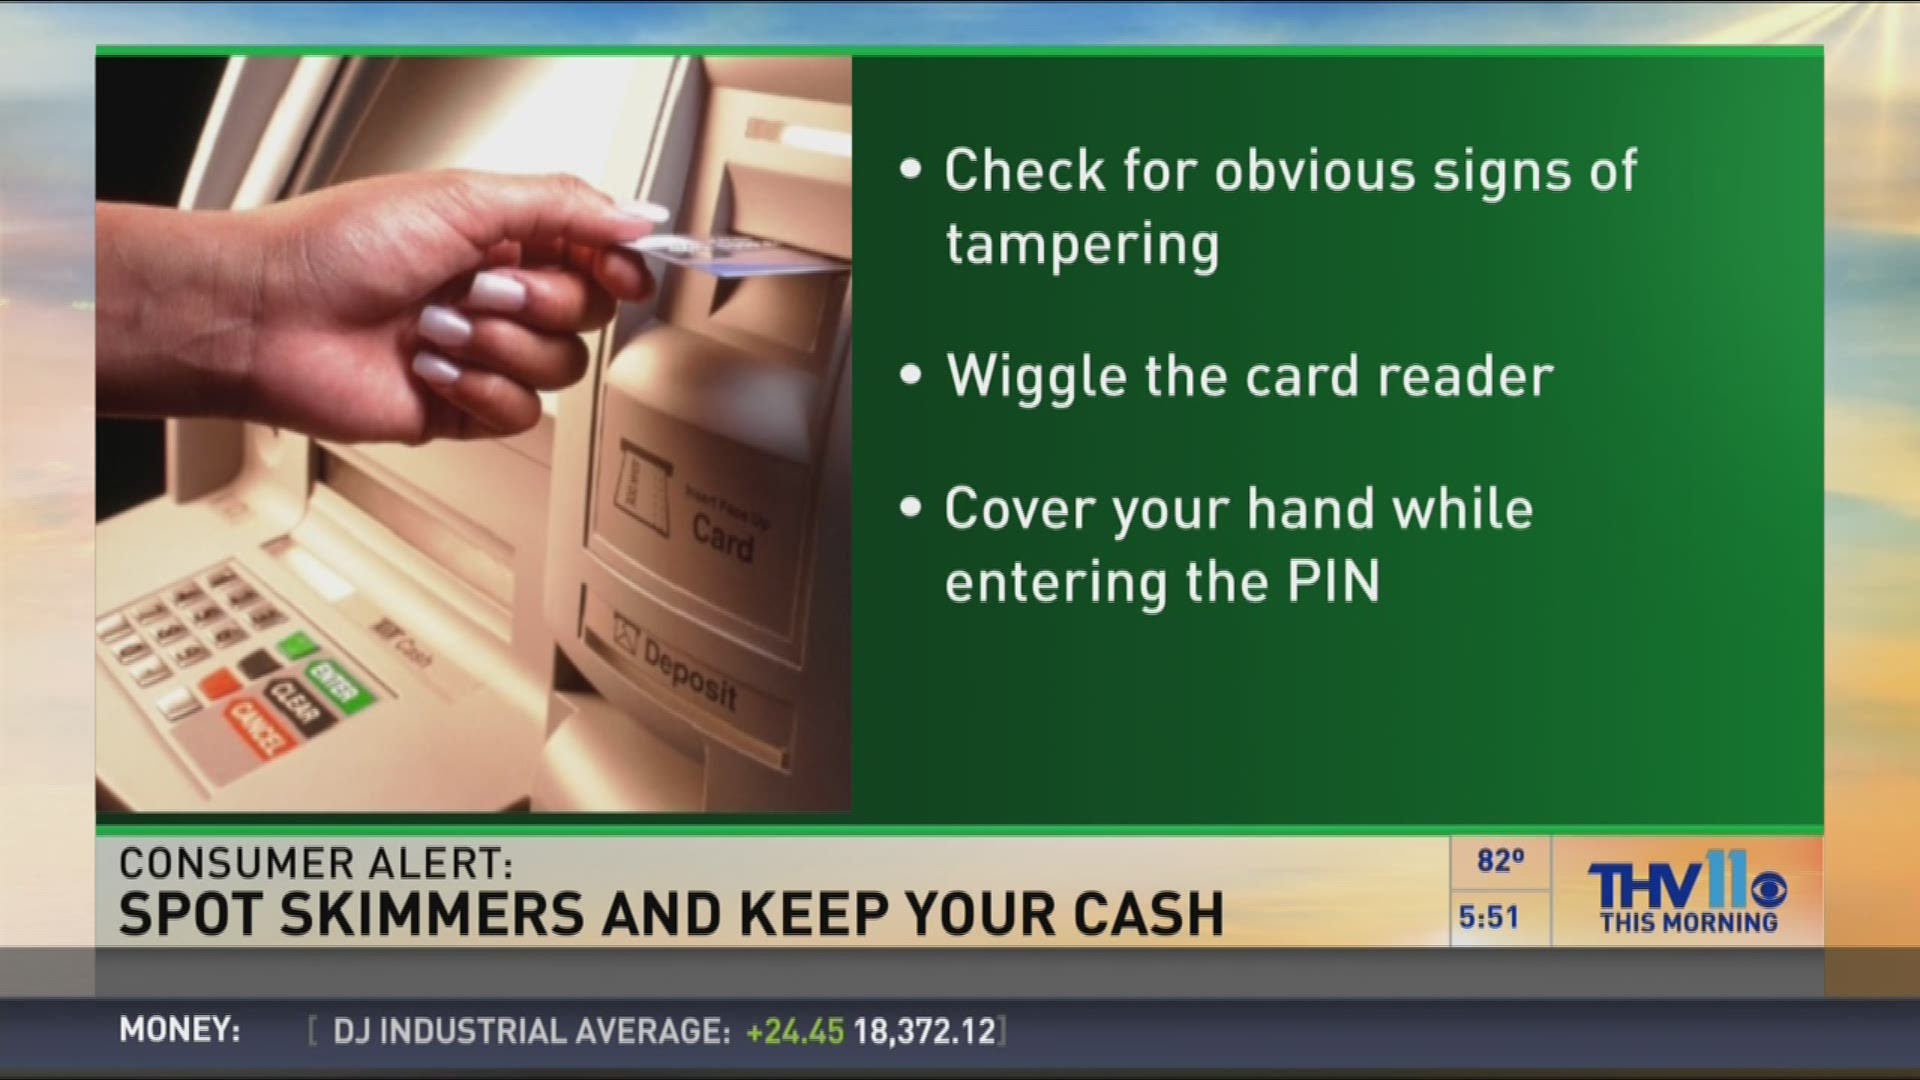 Arkansas Attorney General Leslie Rutledge issued a consumer alert to educate Arkansans about this scam and provide tips to avoid falling victim to skimming.